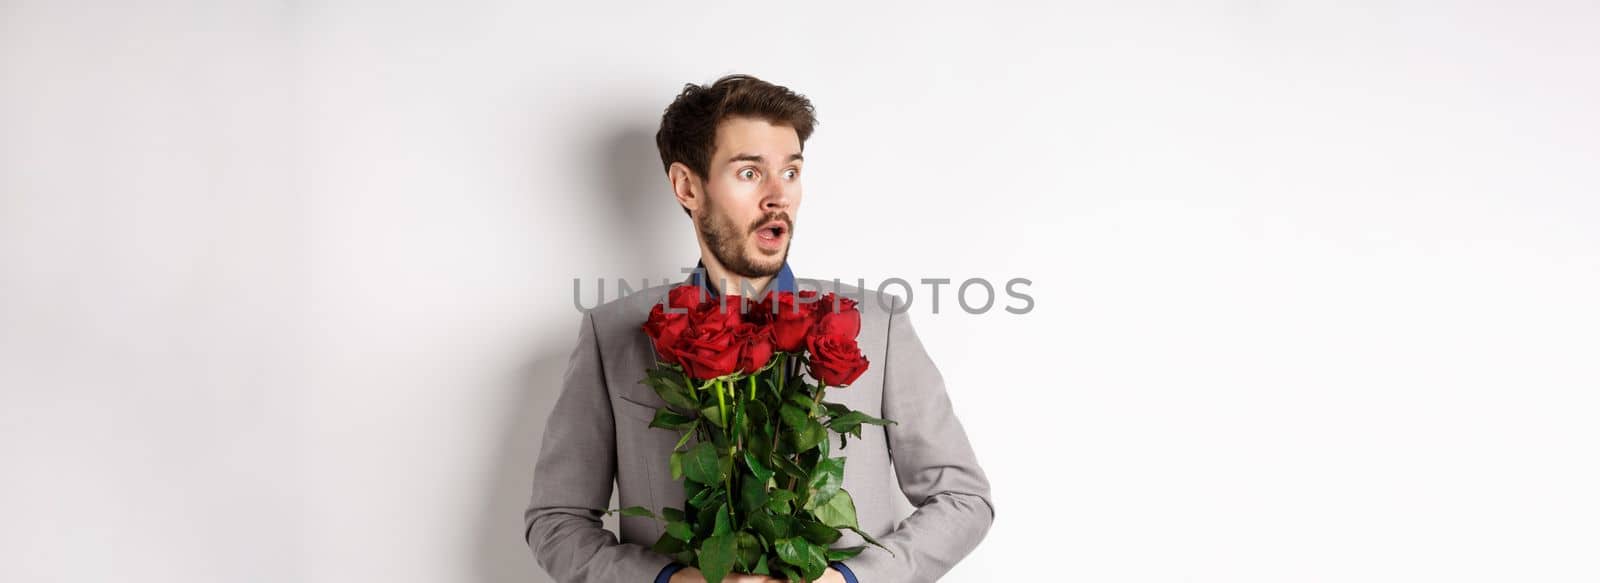 Handsome young man in suit holding red roses, looking left with surprised and startled expression, standing on Valentines day over white background.